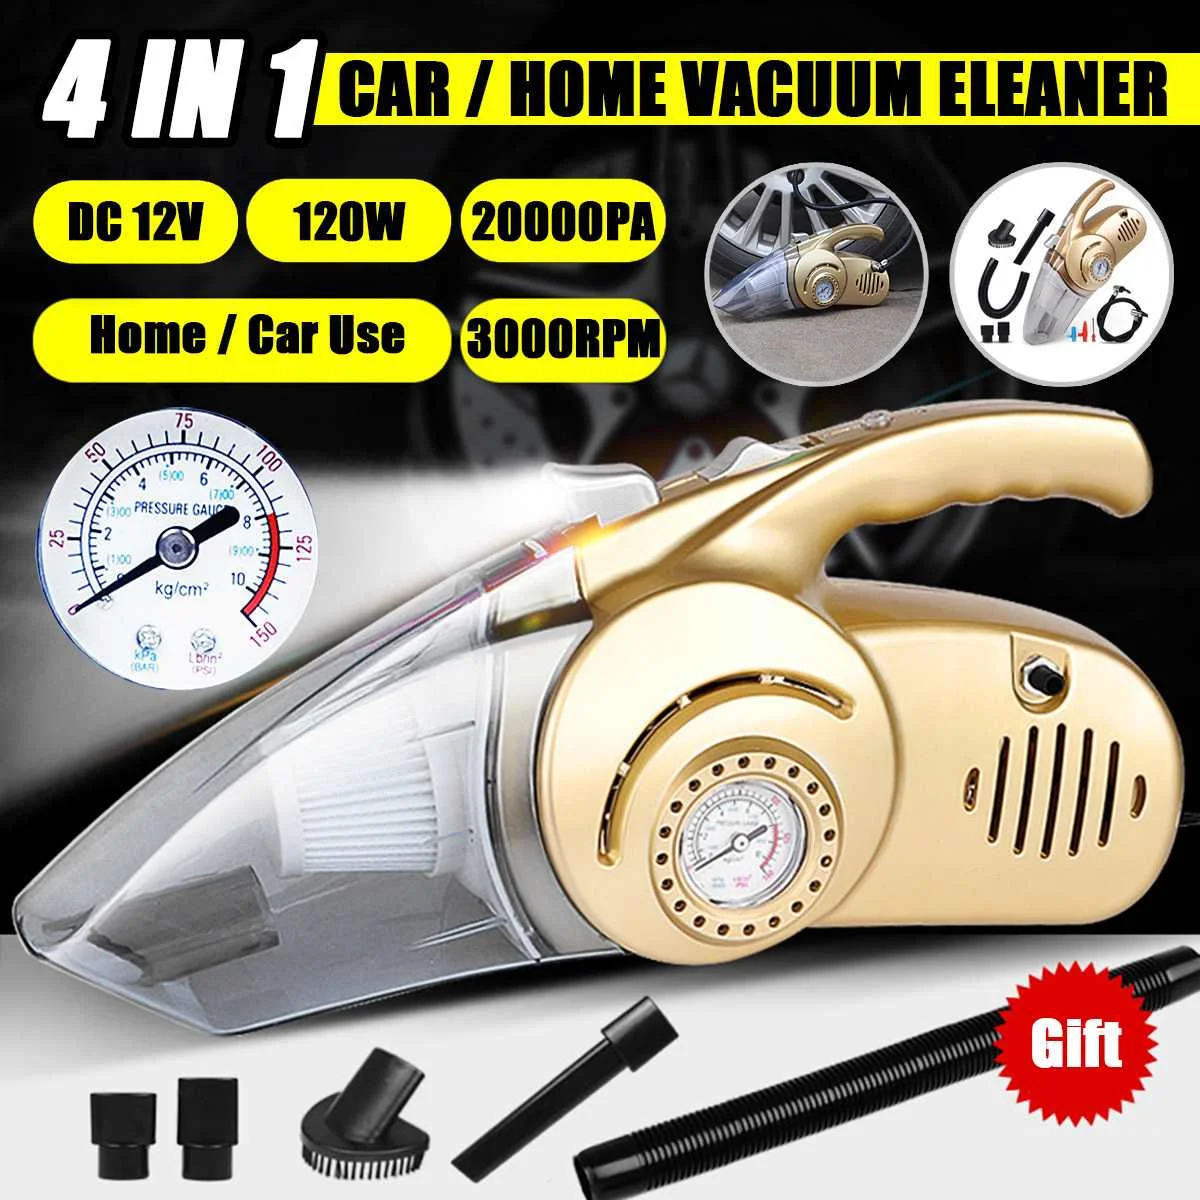 

4 in 1 20000PA 3000RPM Vacuum Cleaner For Home Car Handheld Vaccum Cleaners with Tire Inflator Pump Pressure Gauge Power Suction